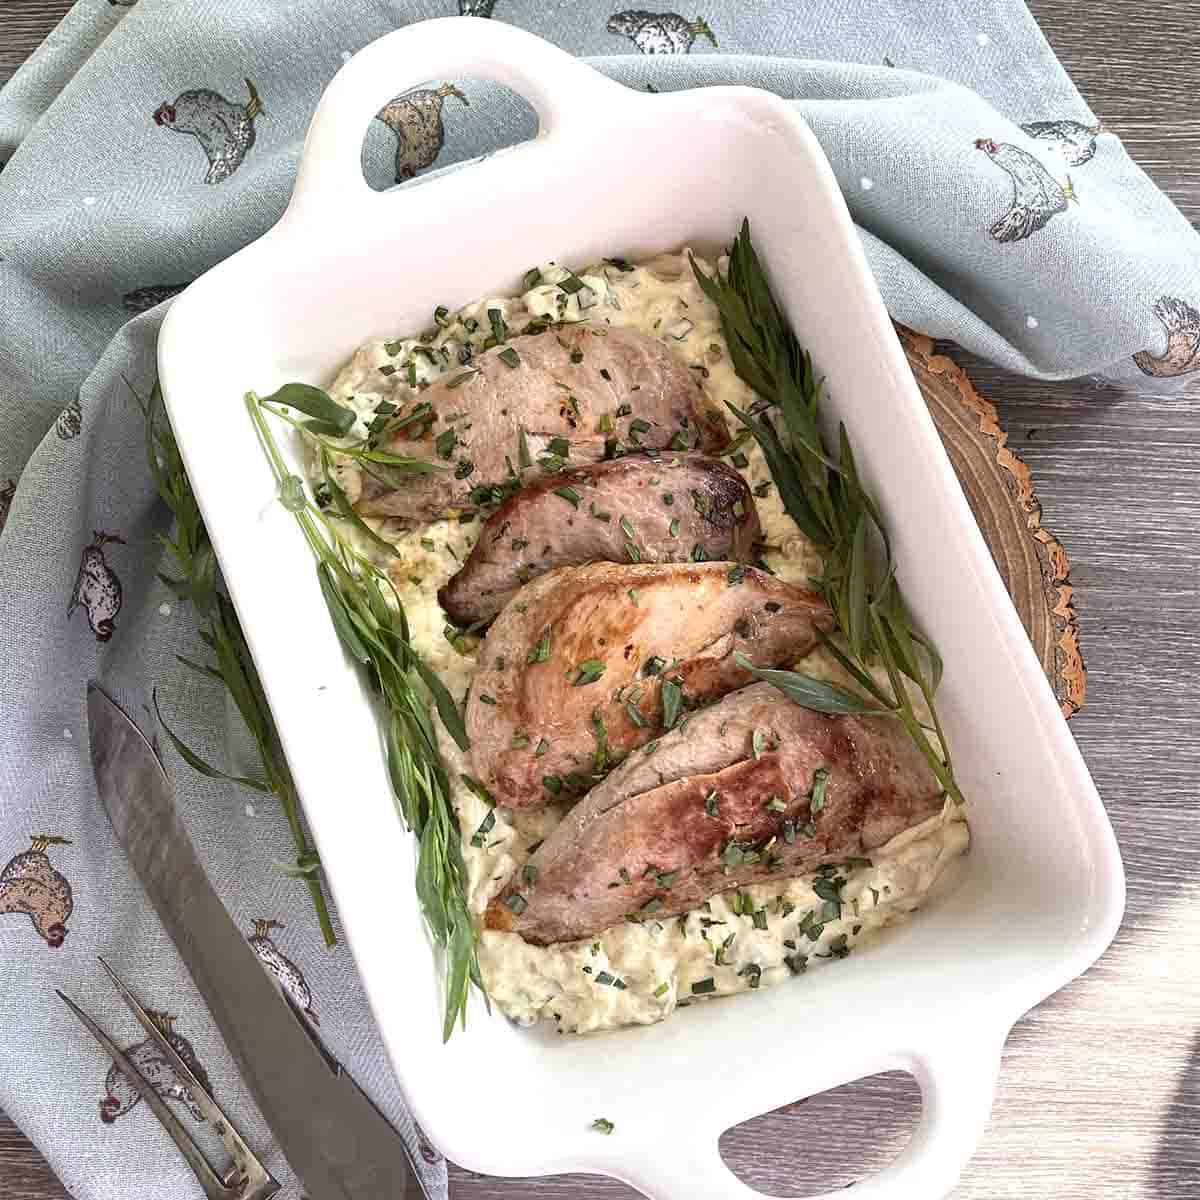 White rectangular casserole dish with brown pheasant breasts and chopped green herbs in it.